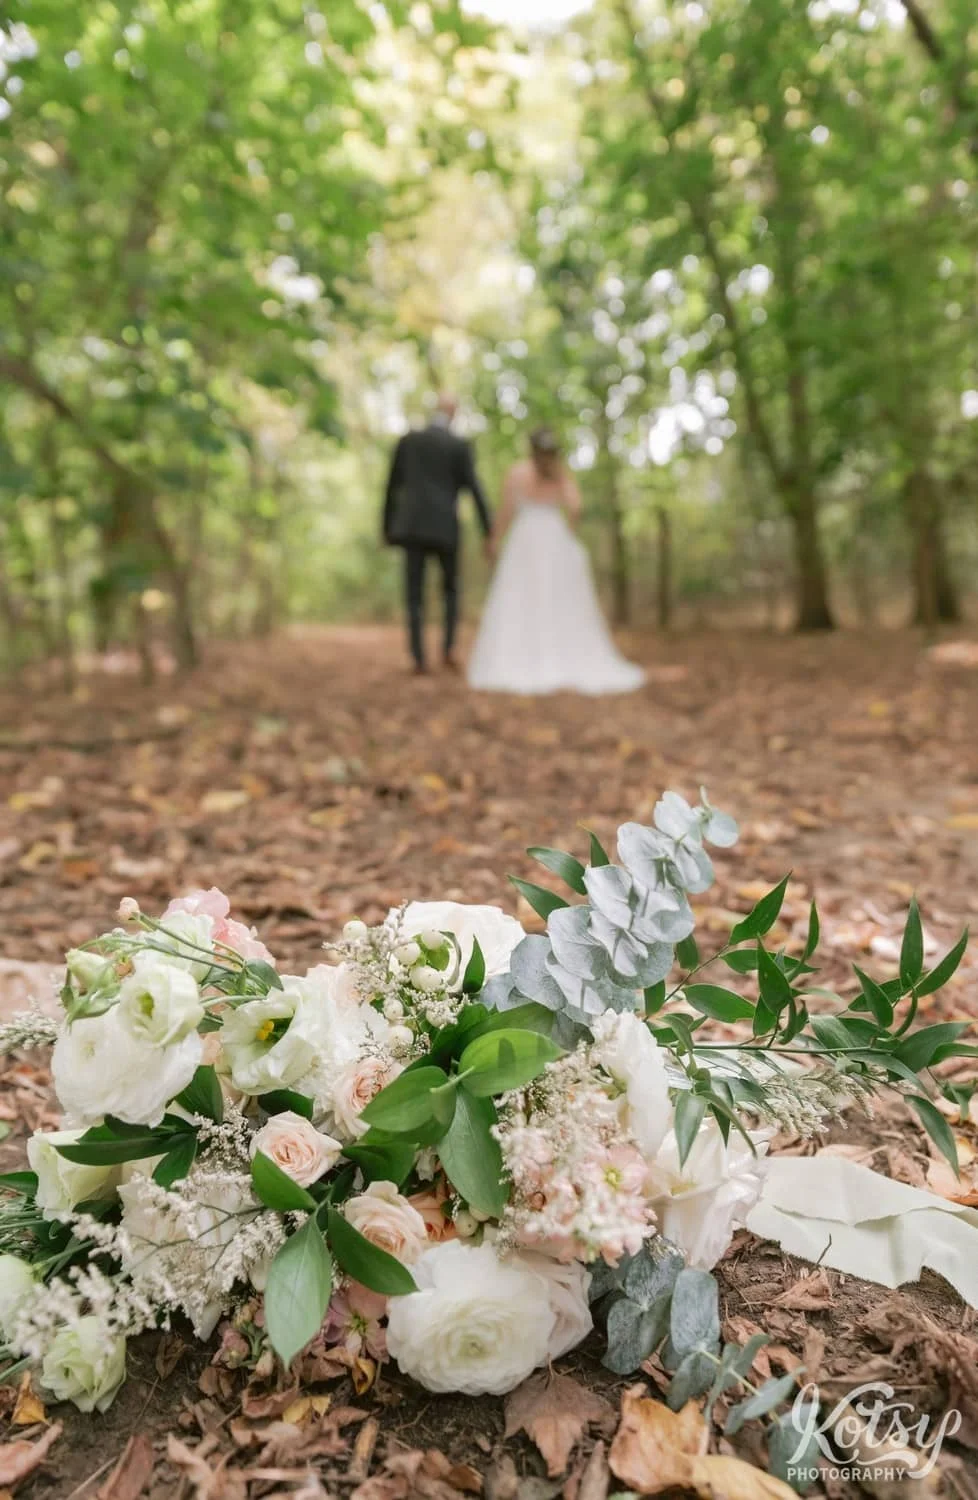 A close up shot of a flower bouquet on lead covered dirt path at West Deane Park in Toronto Canada. Seen in the background is a bride and groom walking away from the camera while holding hands